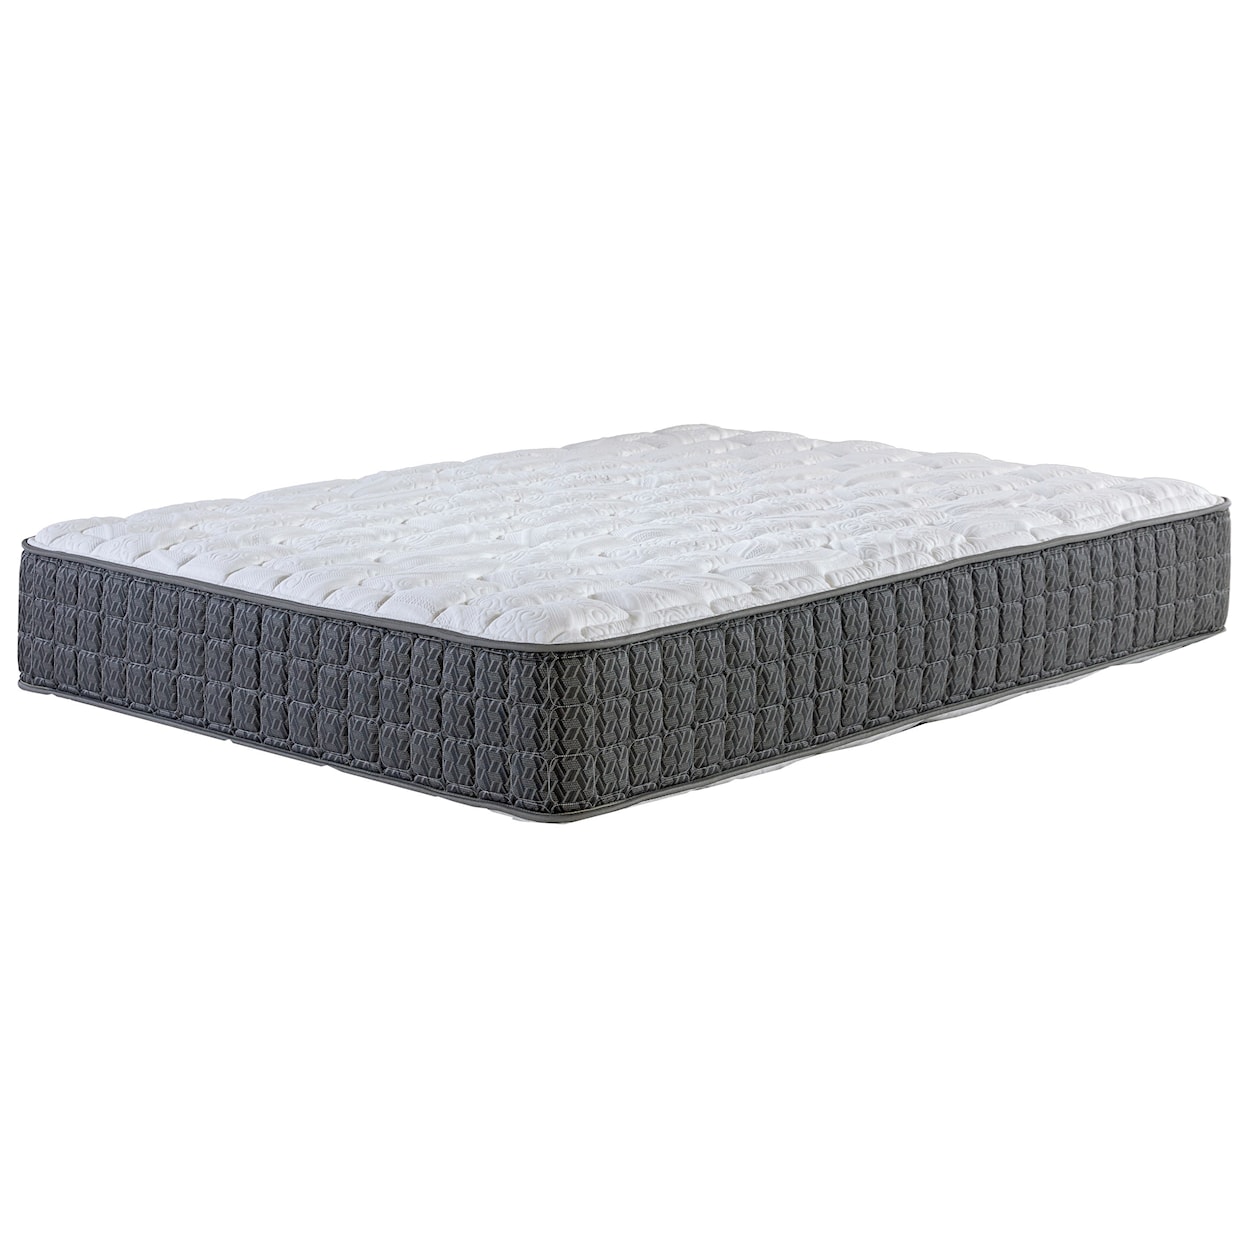 Corsicana Rossington Firm King Firm Two Sided Mattress